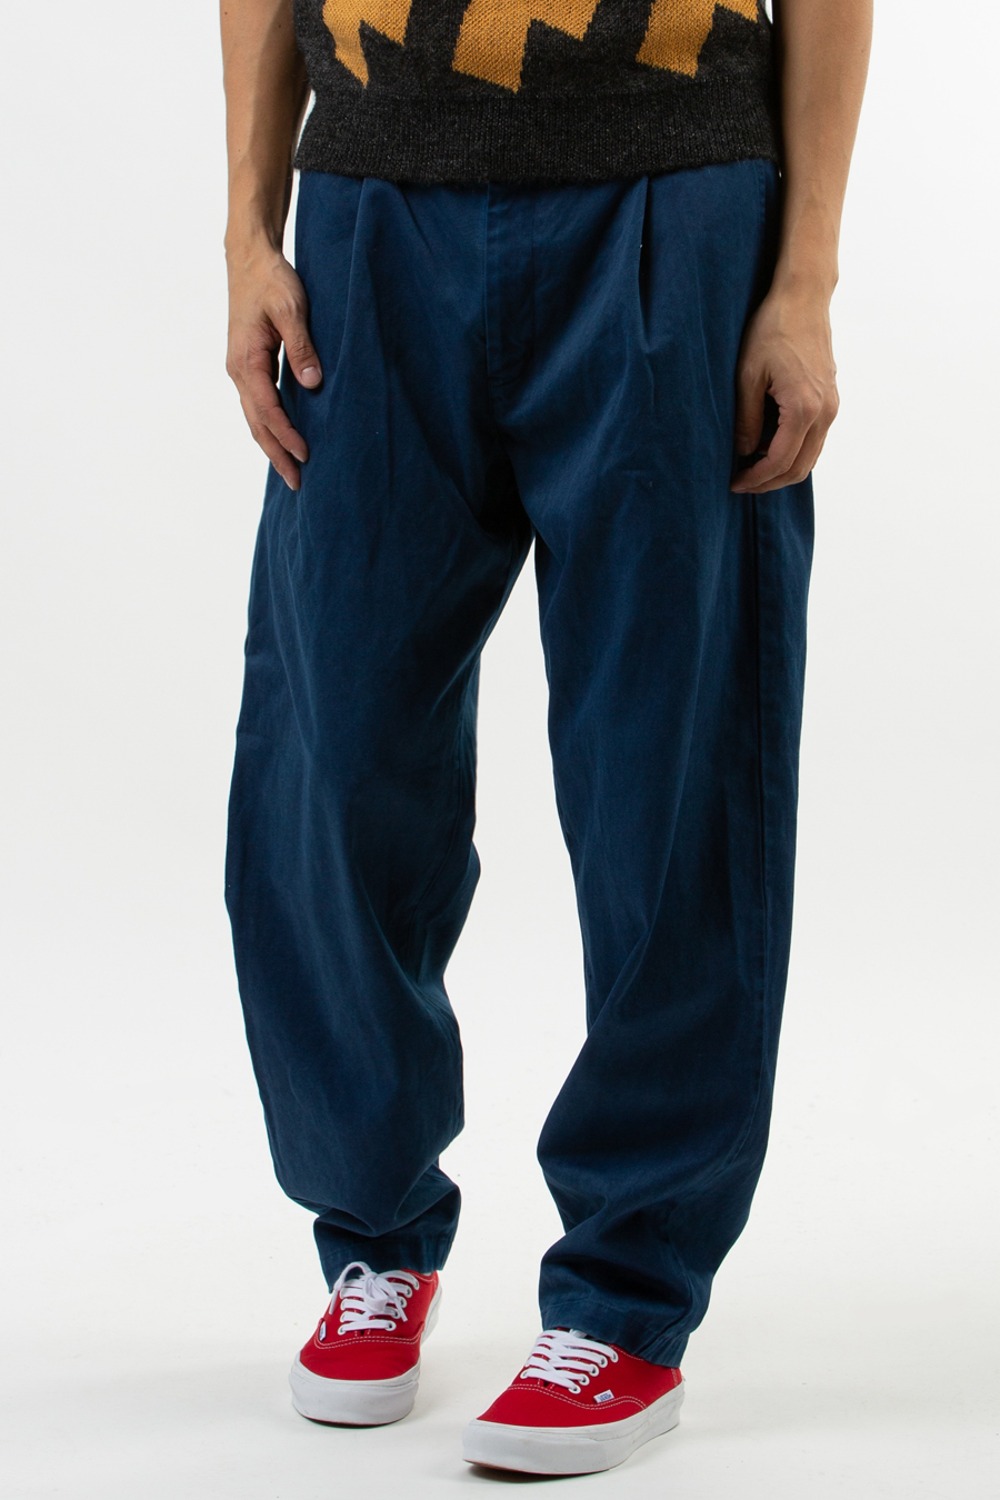 (22FW) J6725 MENS WOVEN COTTON TWILL ONE TUCKHAND DYED PANTS